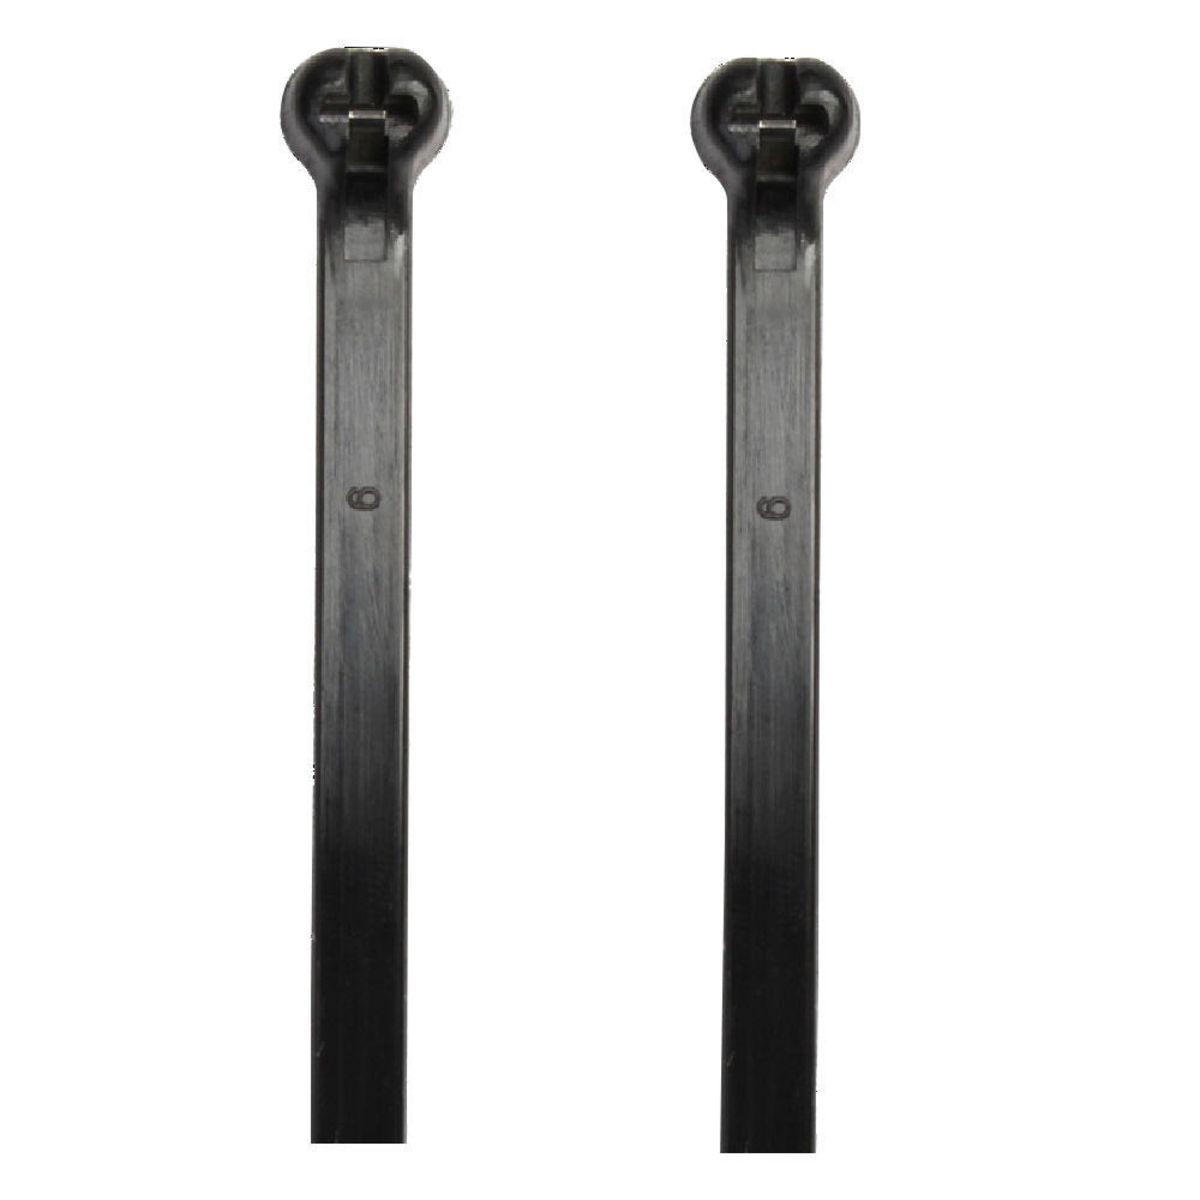 Hubbell CT120400SSBL0 Nylon Stainless Steel BARB Cable Ties, 15.75 IN L, .39 IN W, Tensile Strength: 120 Lbs,Color:Black.  ; Stainless Steel Barb Tie ; Nylon 6/6 Standard, Self-locking stainless steel barb,Maximum strength and adjustability for versatility